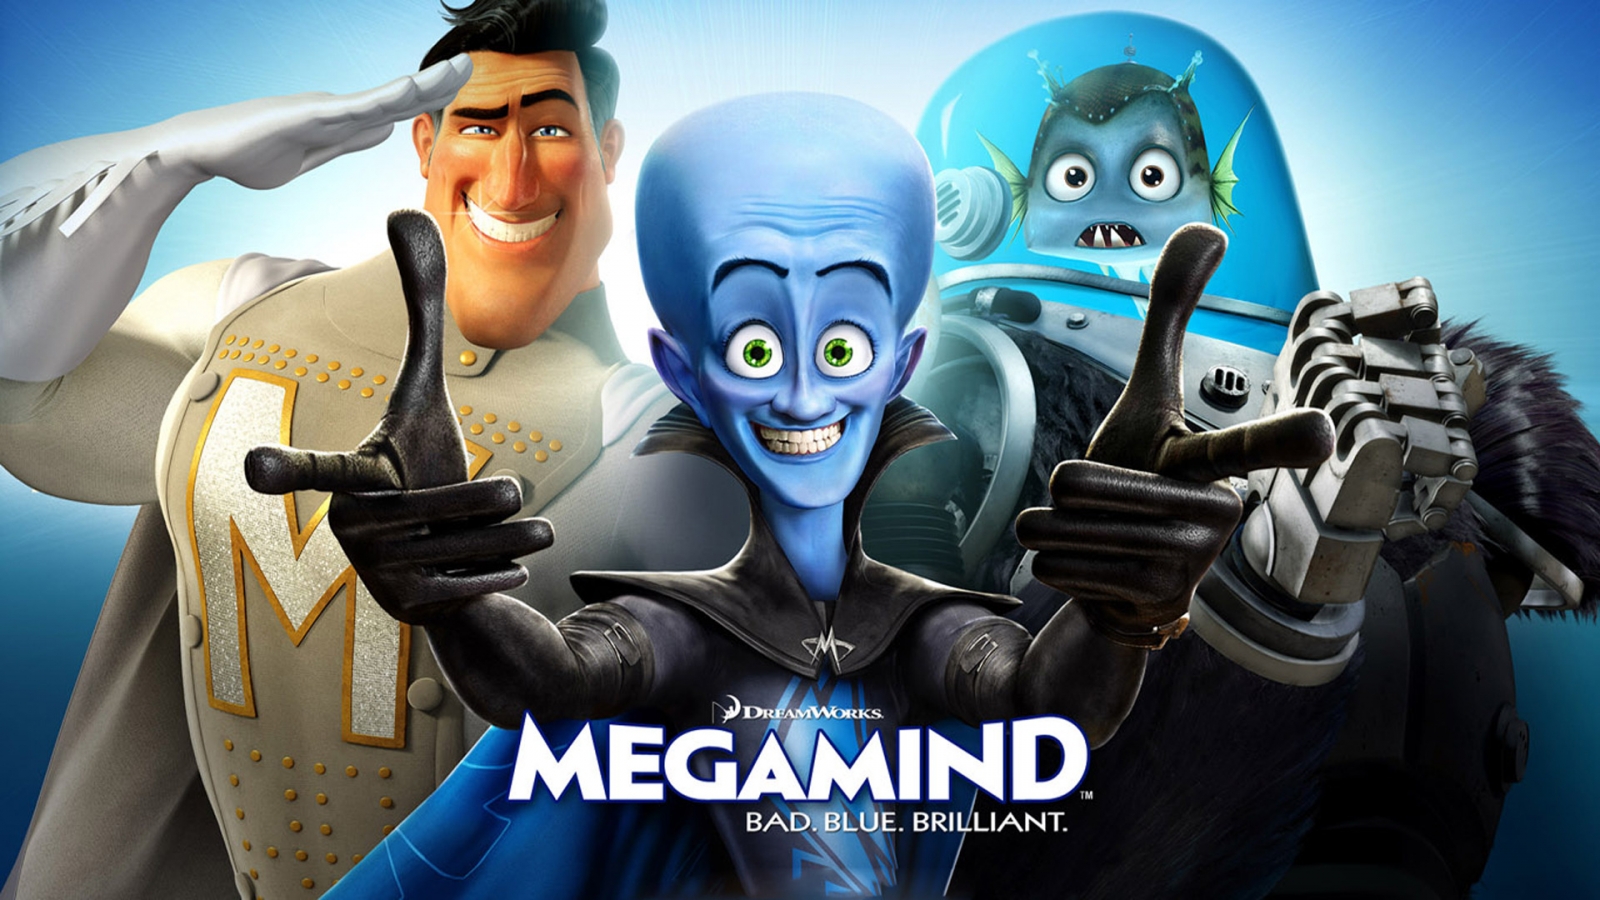 Megamind Characters for 1600 x 900 HDTV resolution